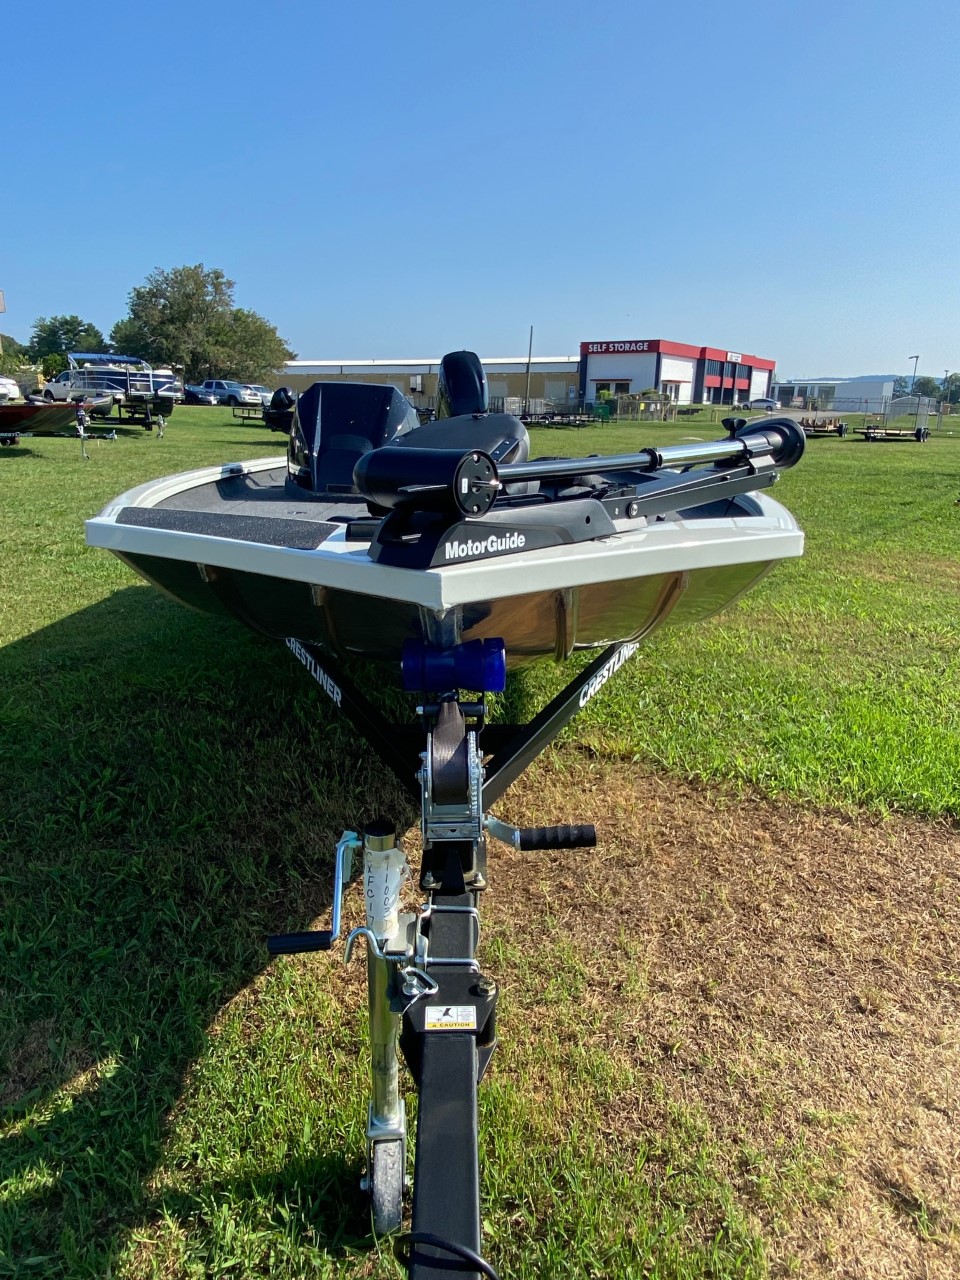 2022 Crestliner XFC 17 Fishing boat for sale in College Dale, TN - image 2 